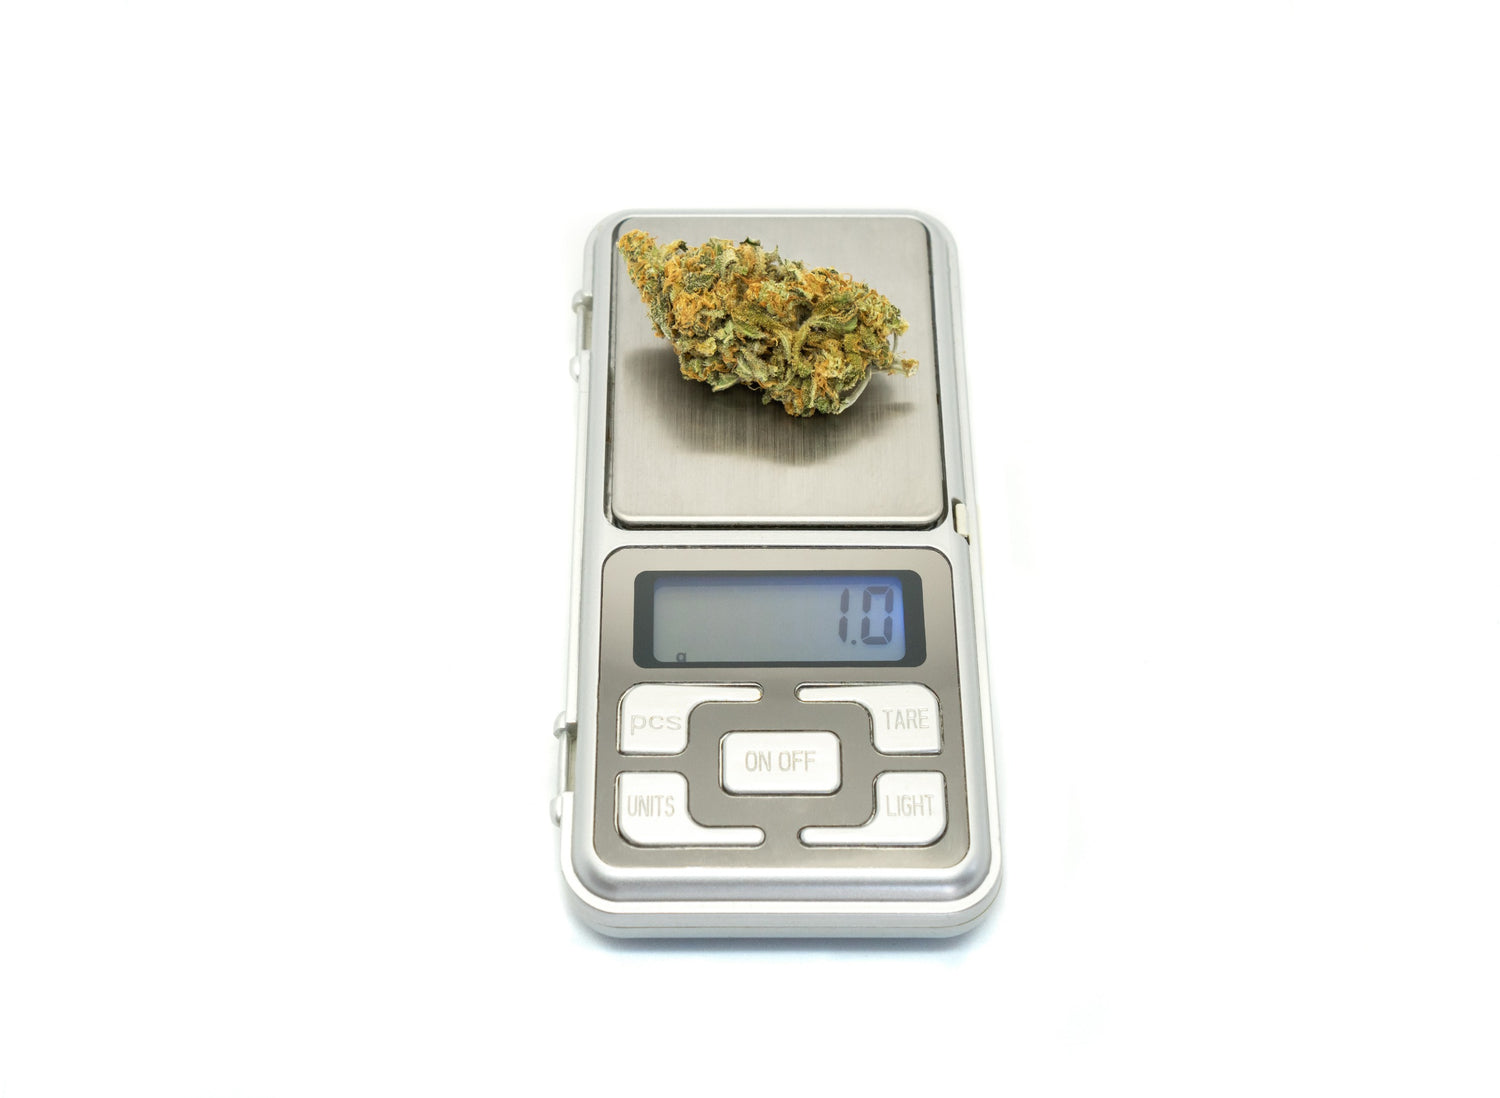 How Many Grams in an Ounce?